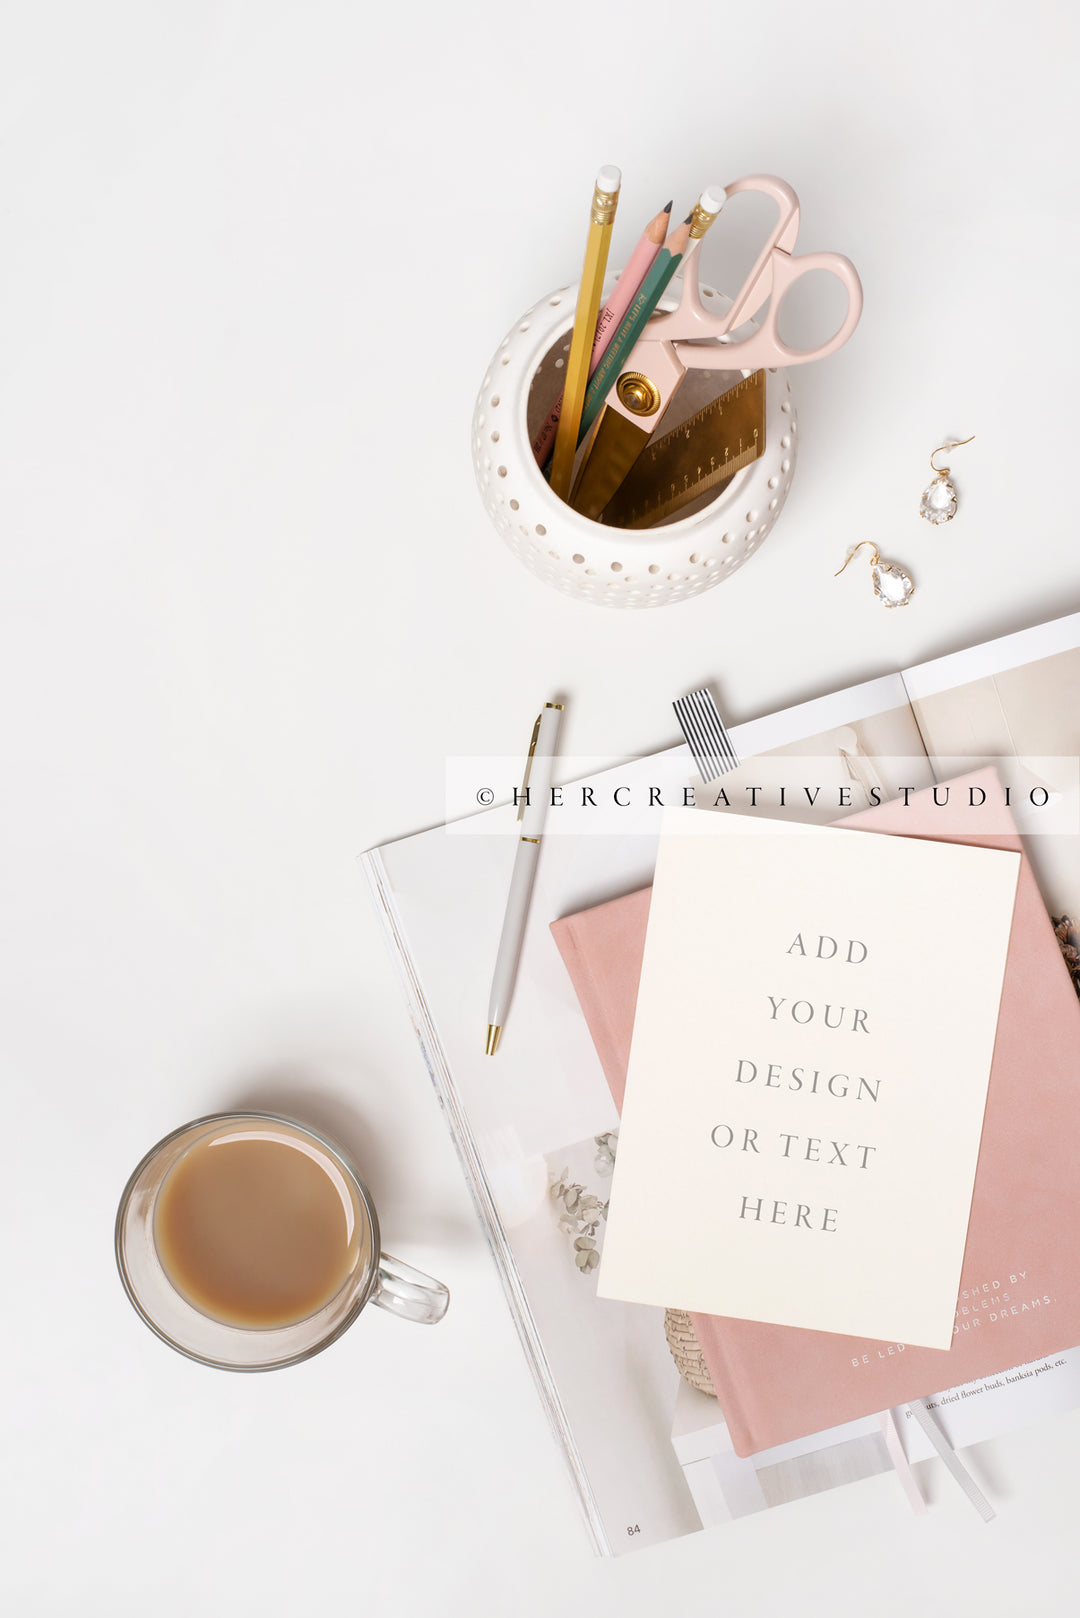 Stationery, Coffee & Scissors on Pretty Workspace, Styled Stock Image